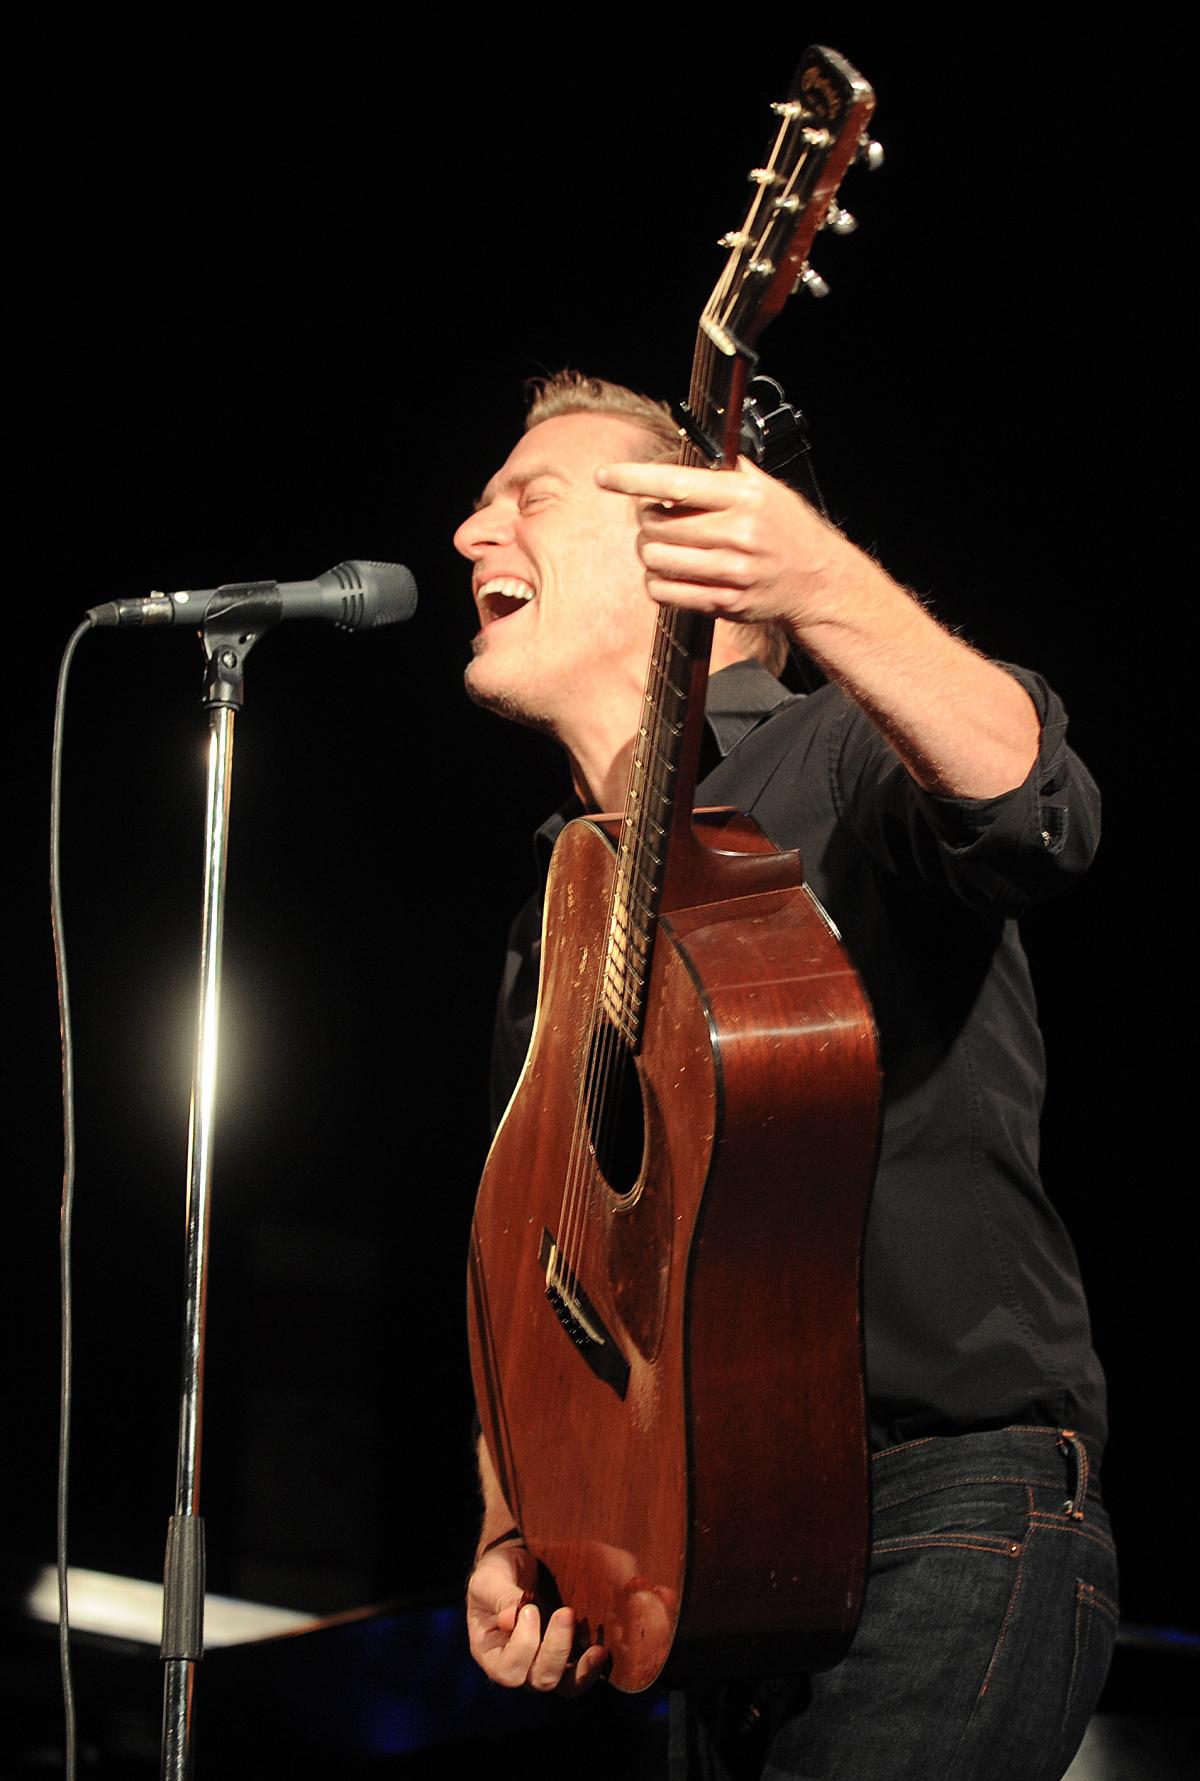 Bryan Adams during a gig at St George's Hall in 2011